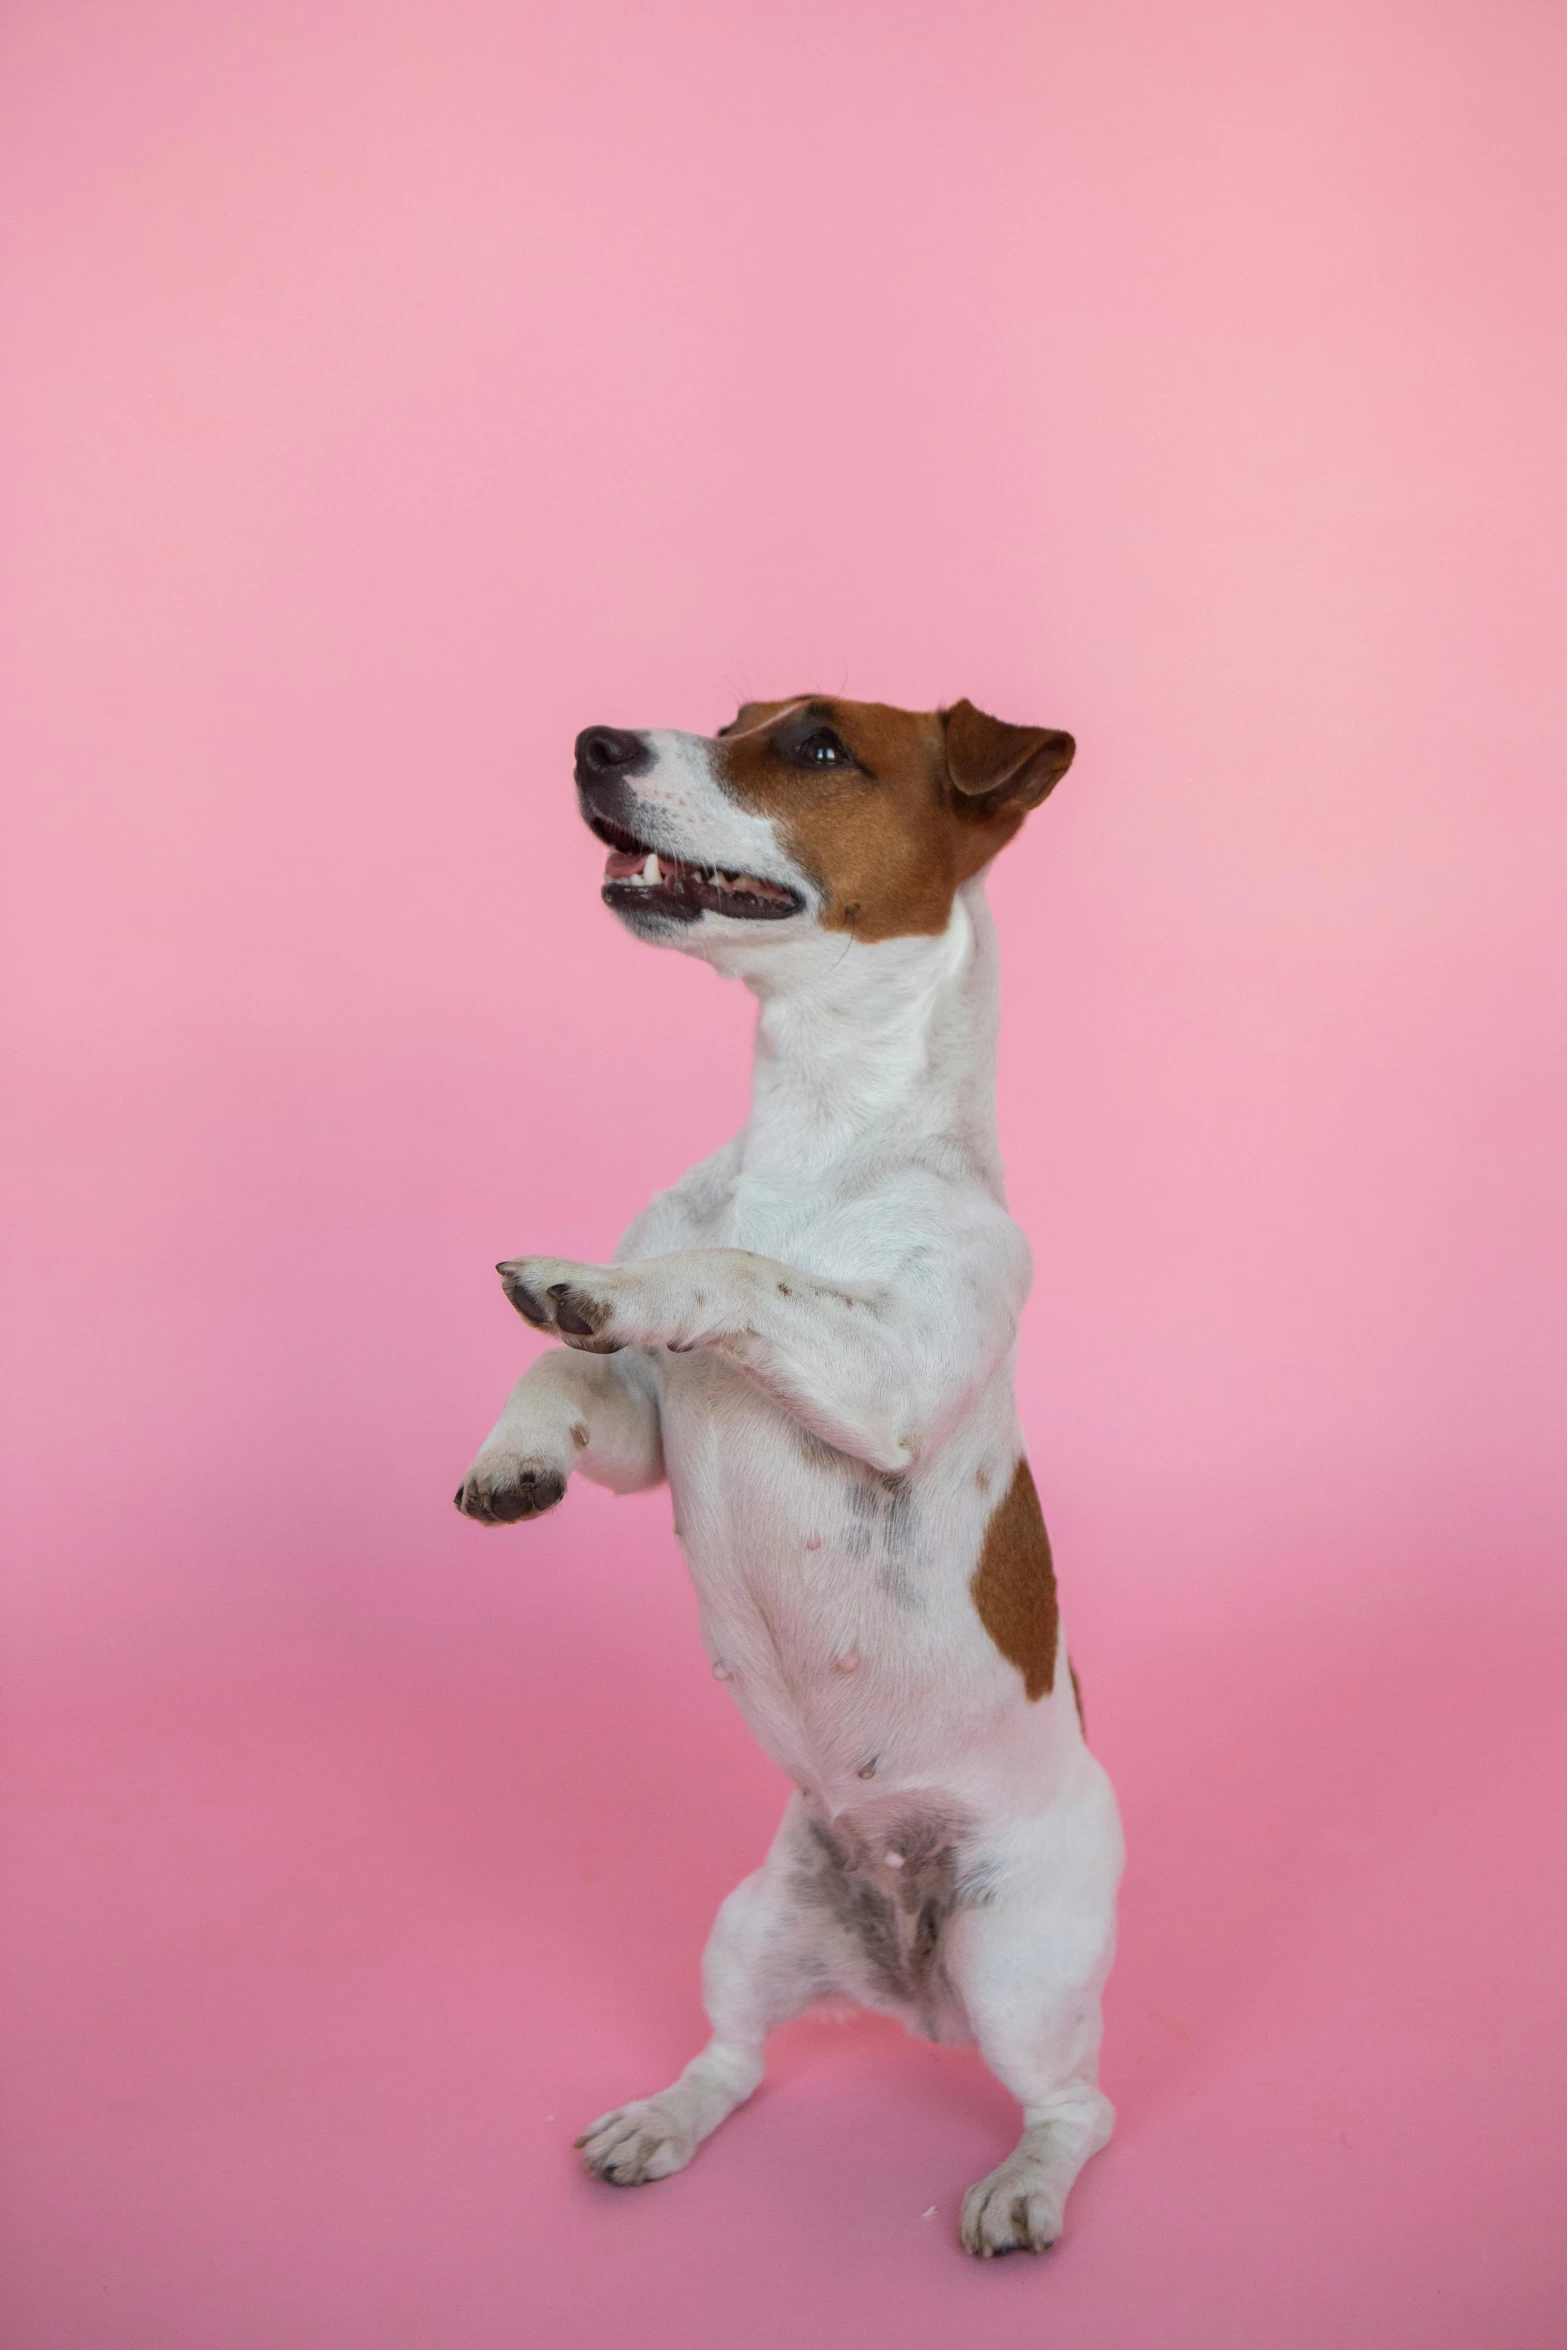 a brown and white dog standing on its hind legs, an album cover, pexels, arabesque, pink, smooth background, jack russel dog, super high resolution